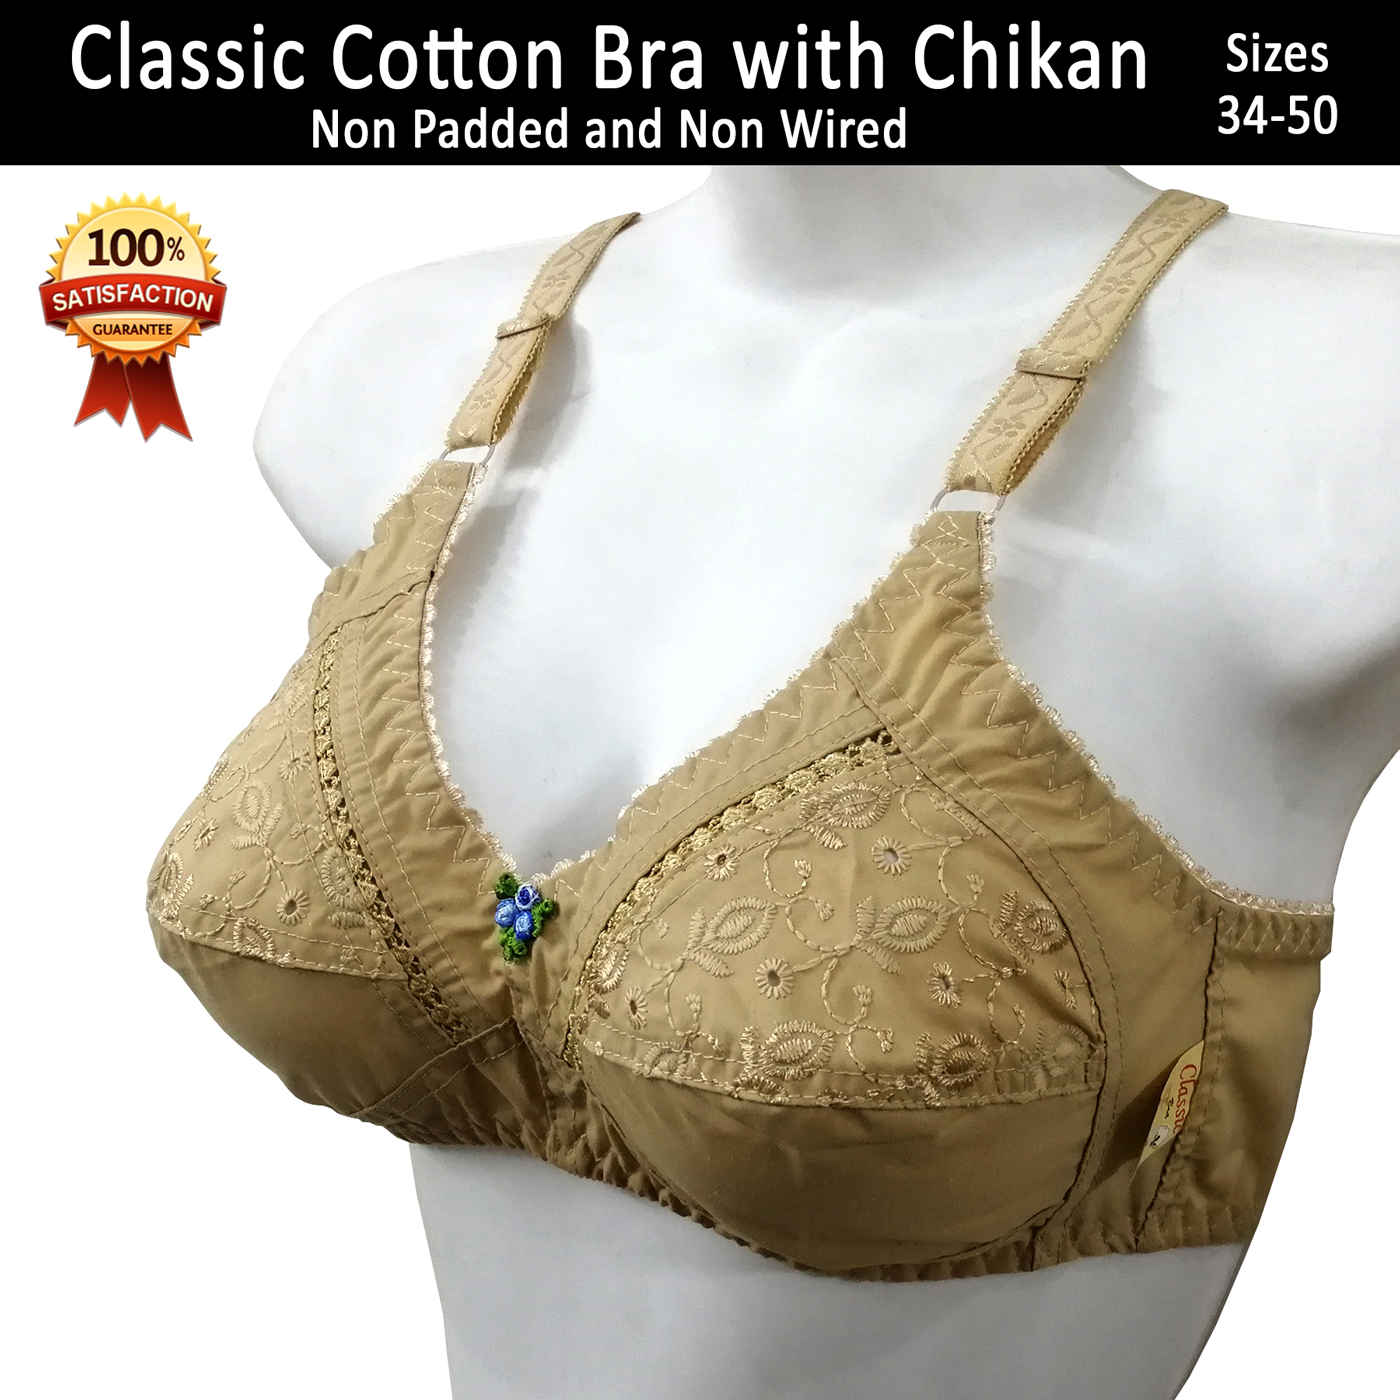 Good Quality Classic Cotton Bras for Women Non Padded Bra for Girls Non  wired Brassiere with Chikan in Beige 34 to 50 Sizes Bra Available Best Fits  for B and C Cups